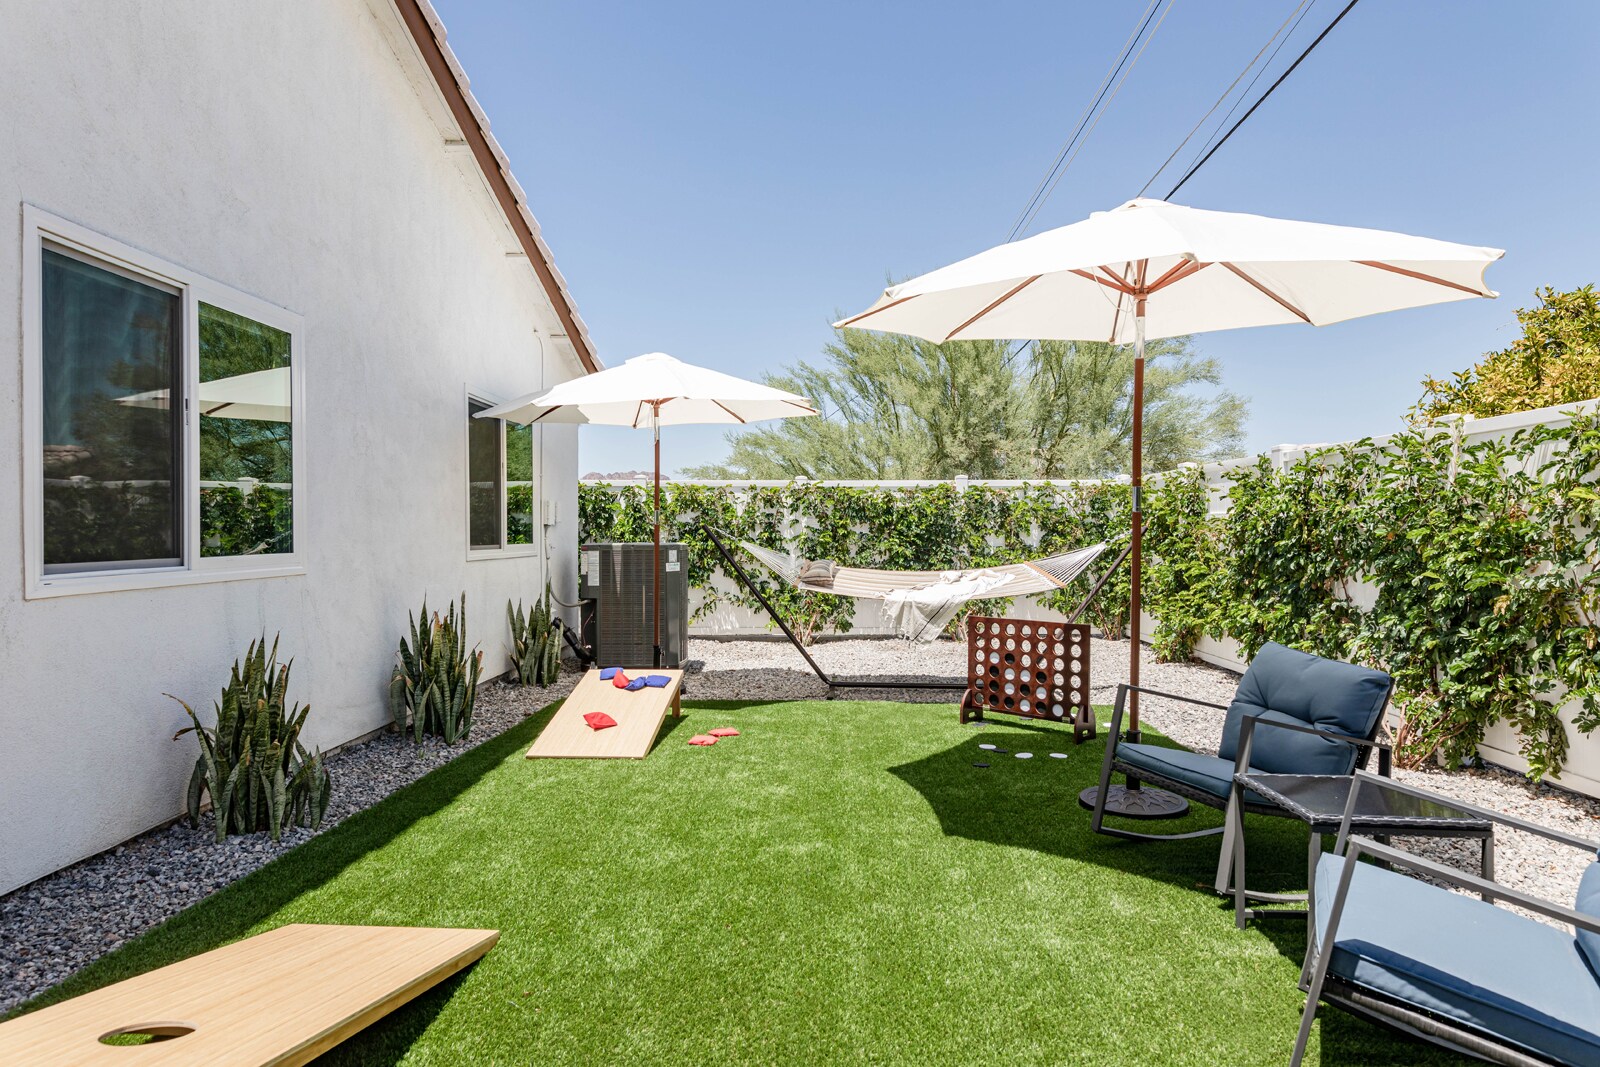 The back lawn offers shaded lounge space, games, and a hammock.